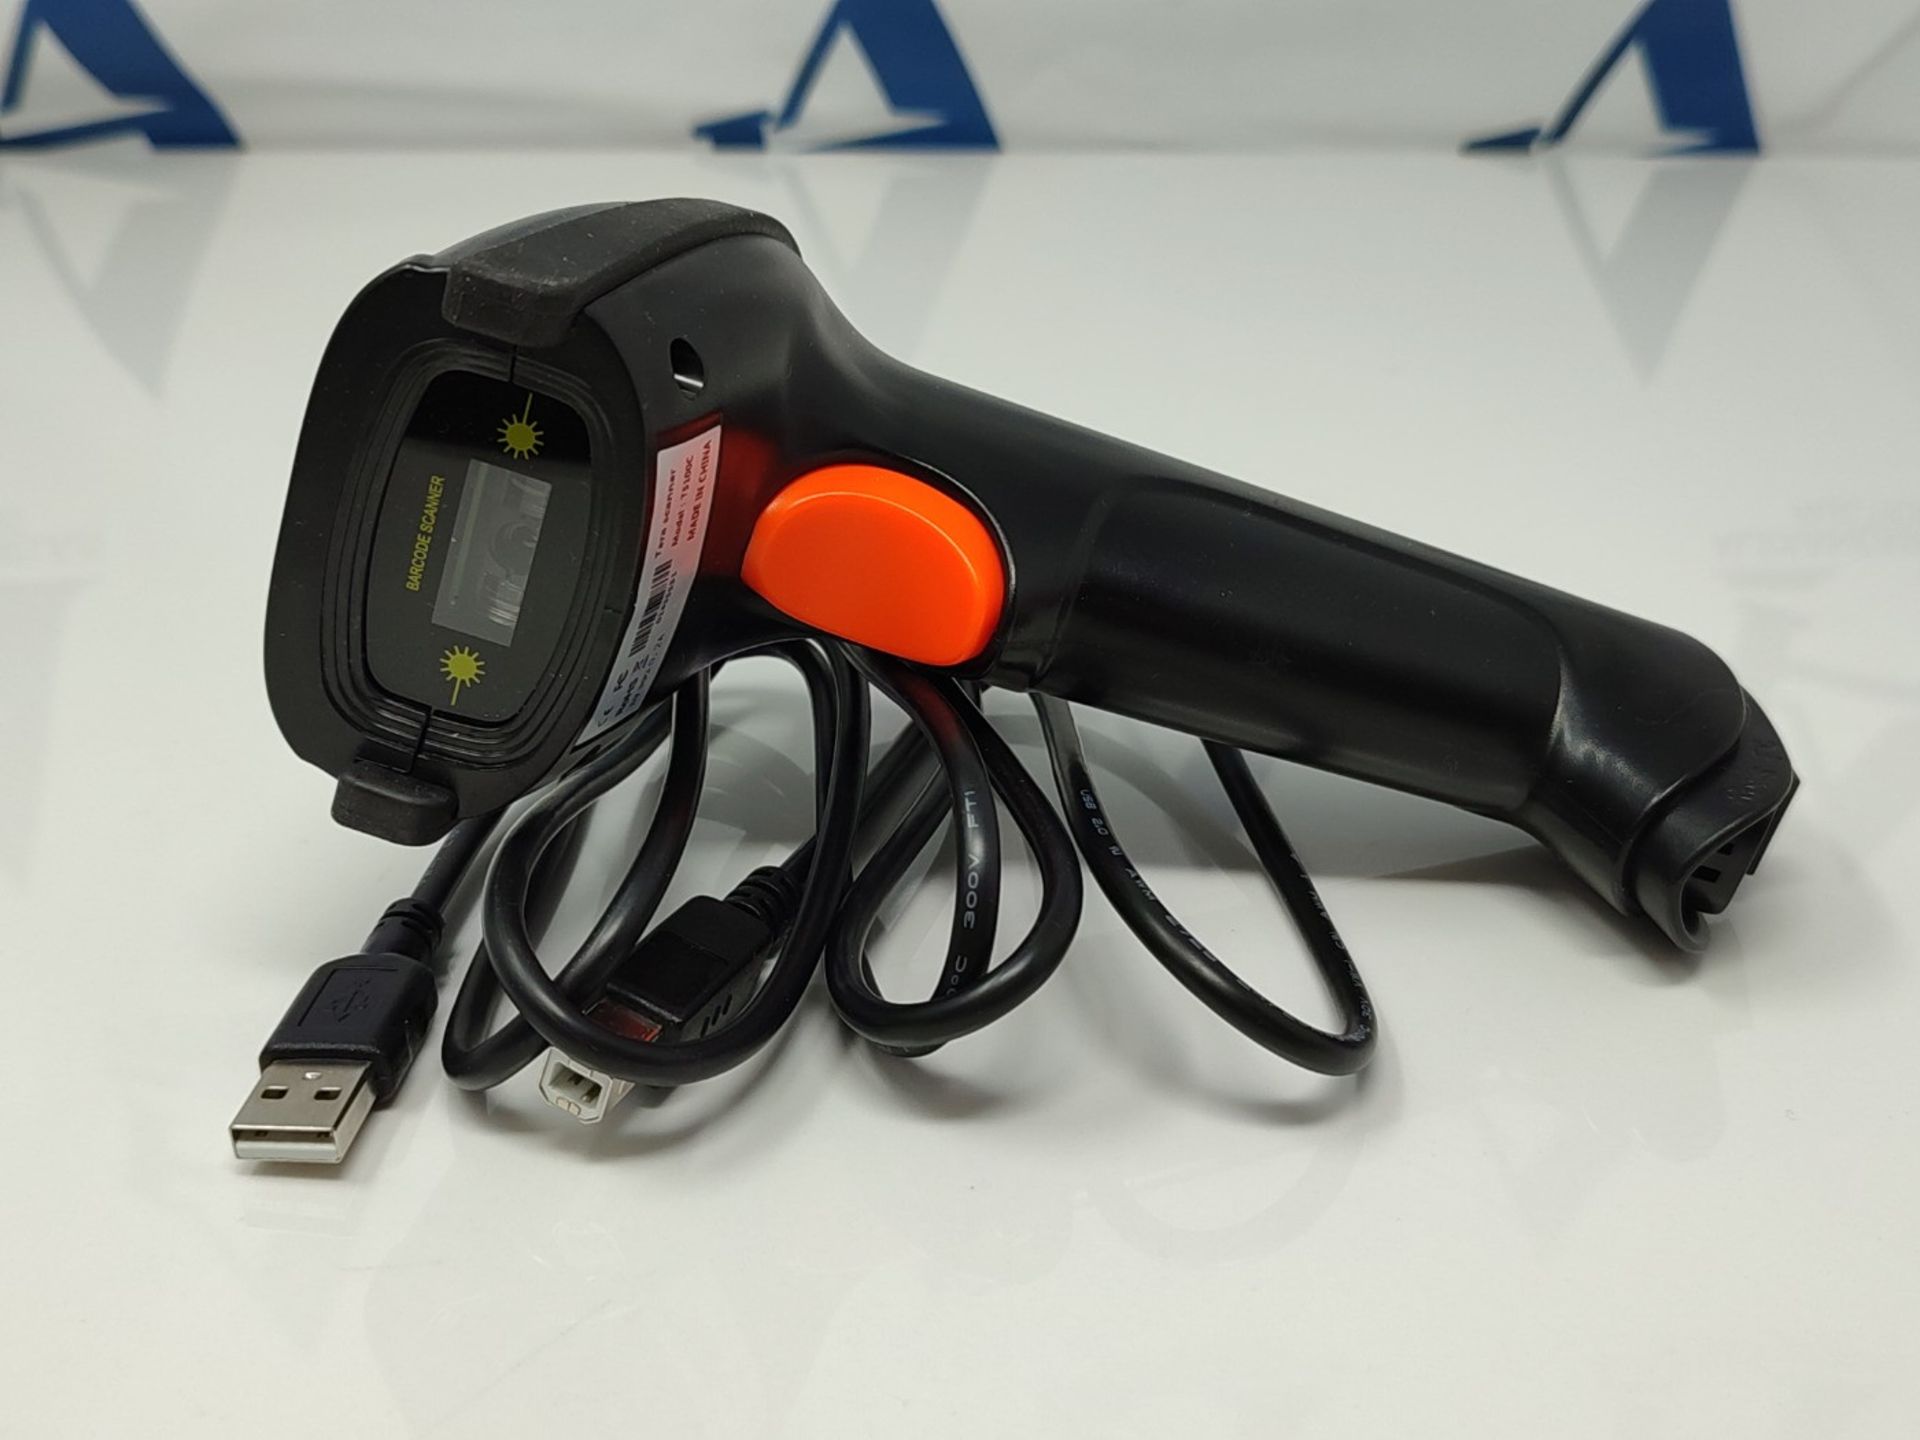 Tera Pro Barcode Scanner Bluetooth 2.4G Wireless, 2500 Pixel CCD USB Wired Handheld 1D - Image 2 of 2